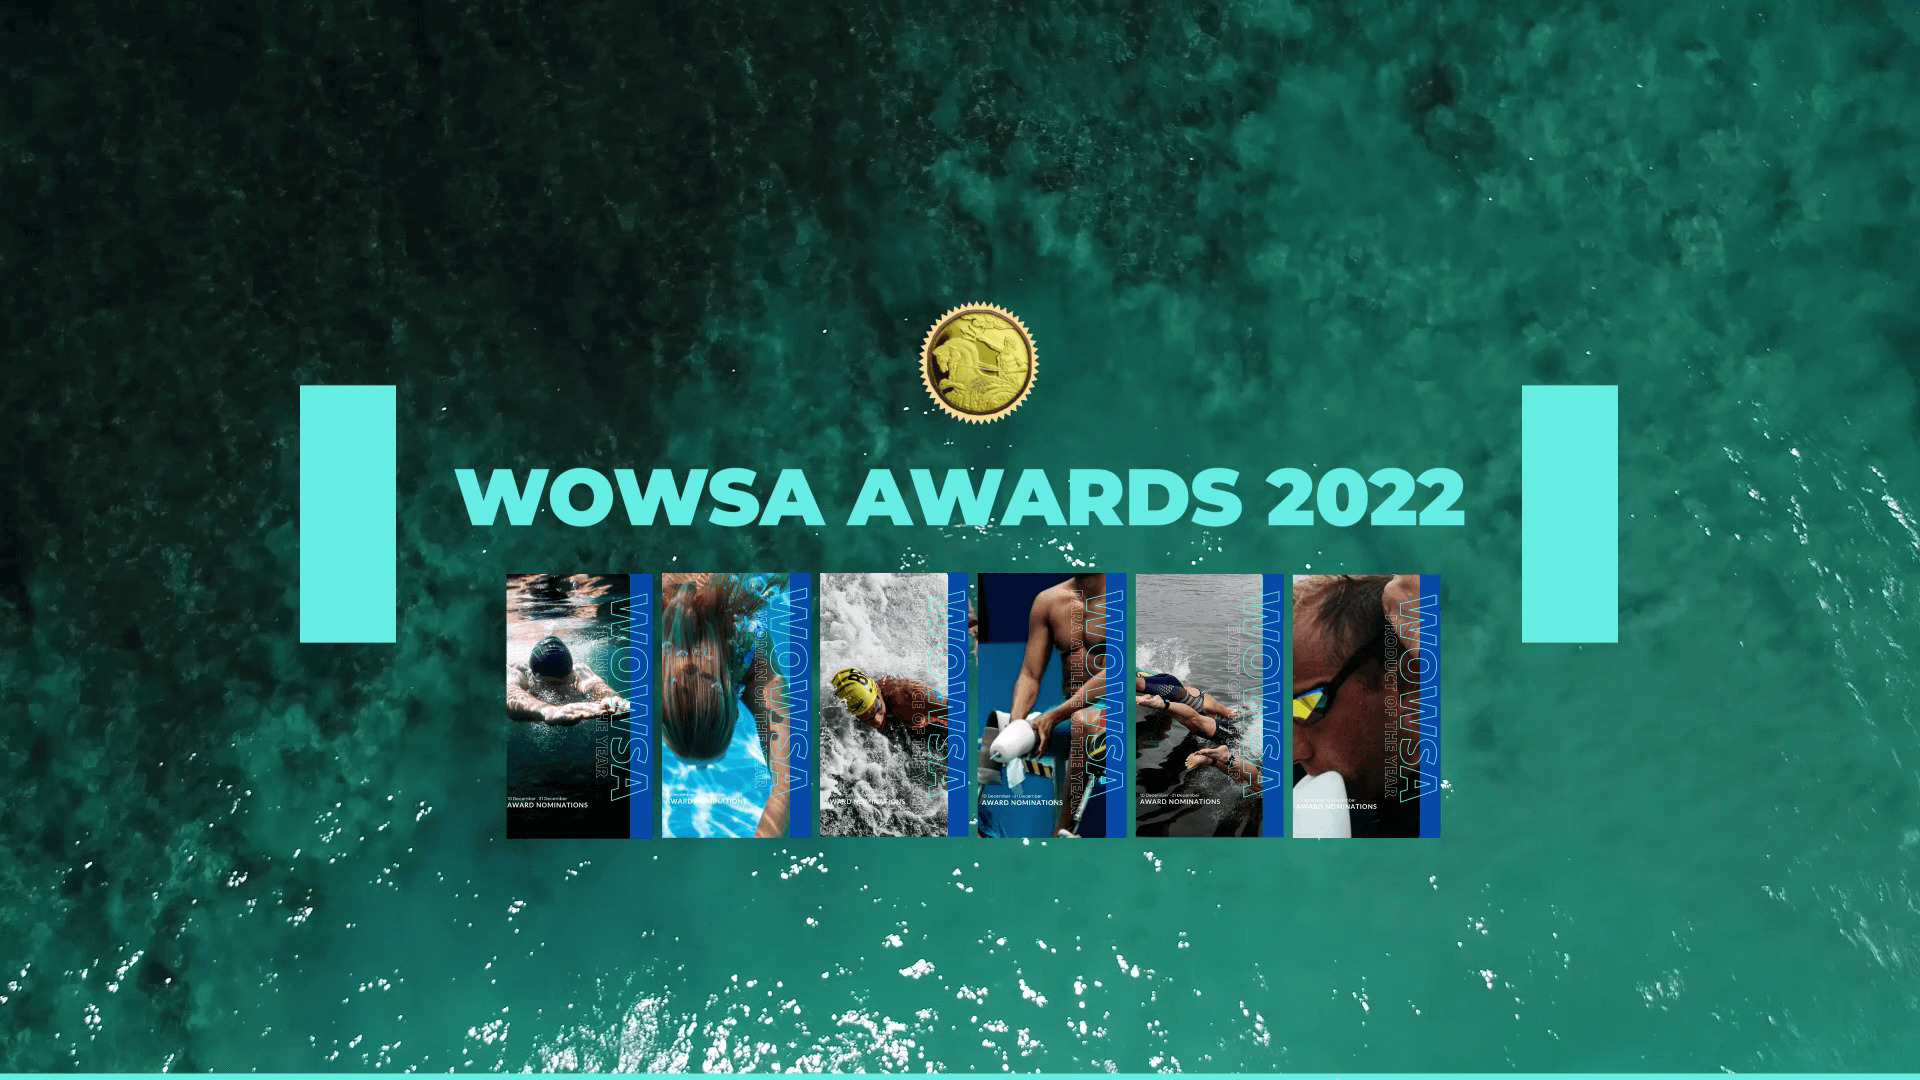 Team Bits Missing – Achievements at the Open Water Swimming 2022 WOWSA Awards